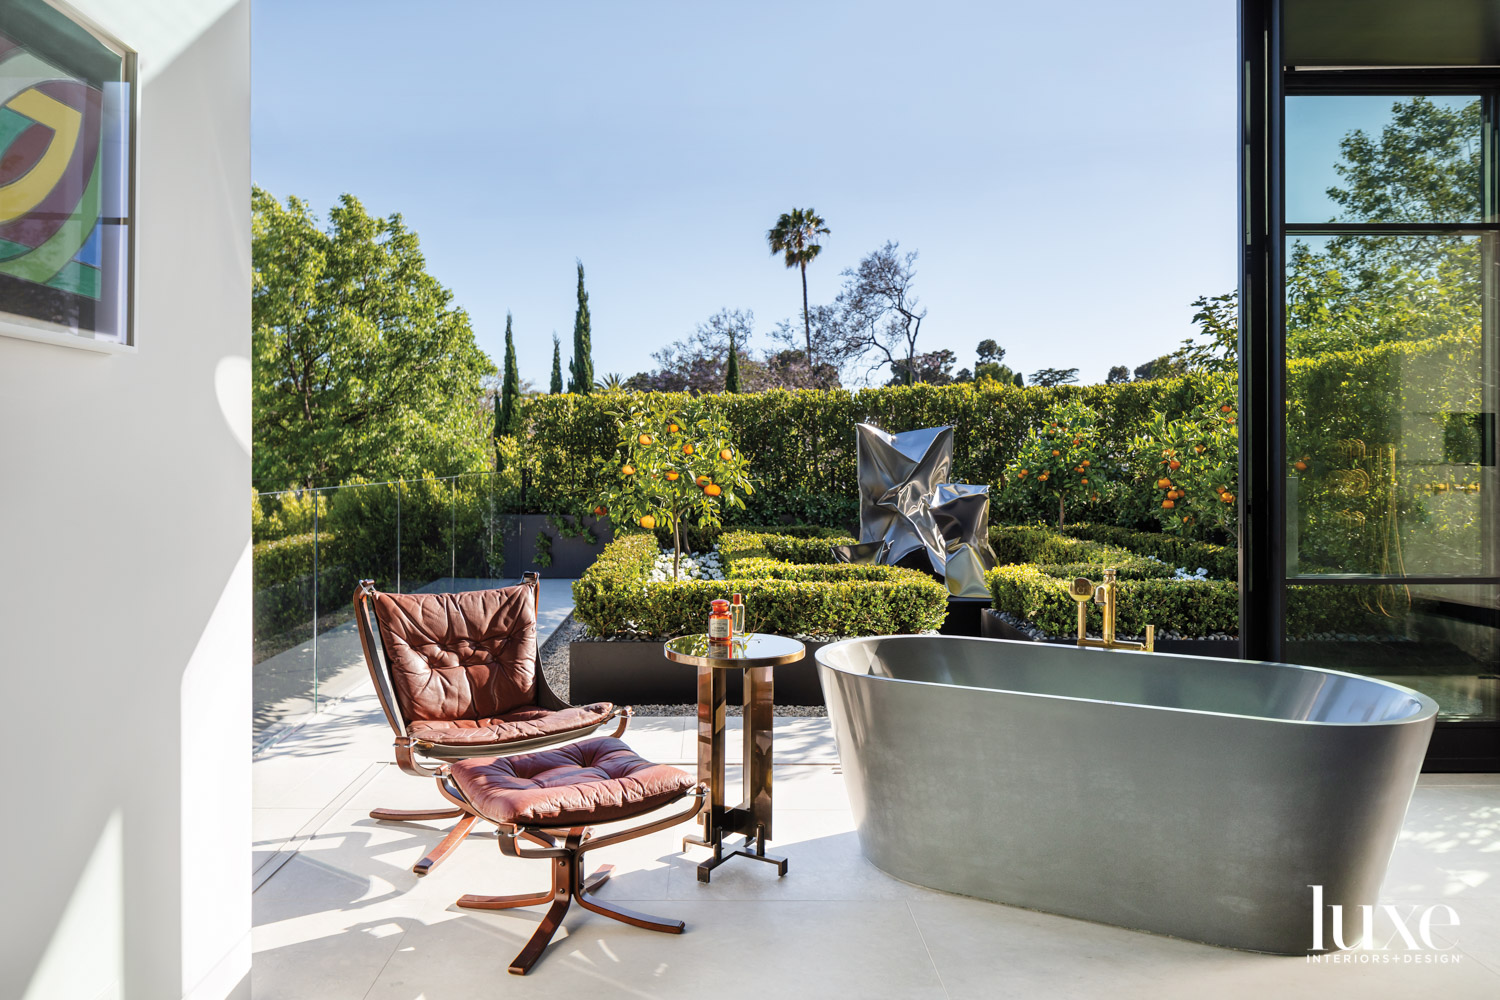 Modern bathroom with freestanding tub and outdoor view serve as perfect garden inspiration